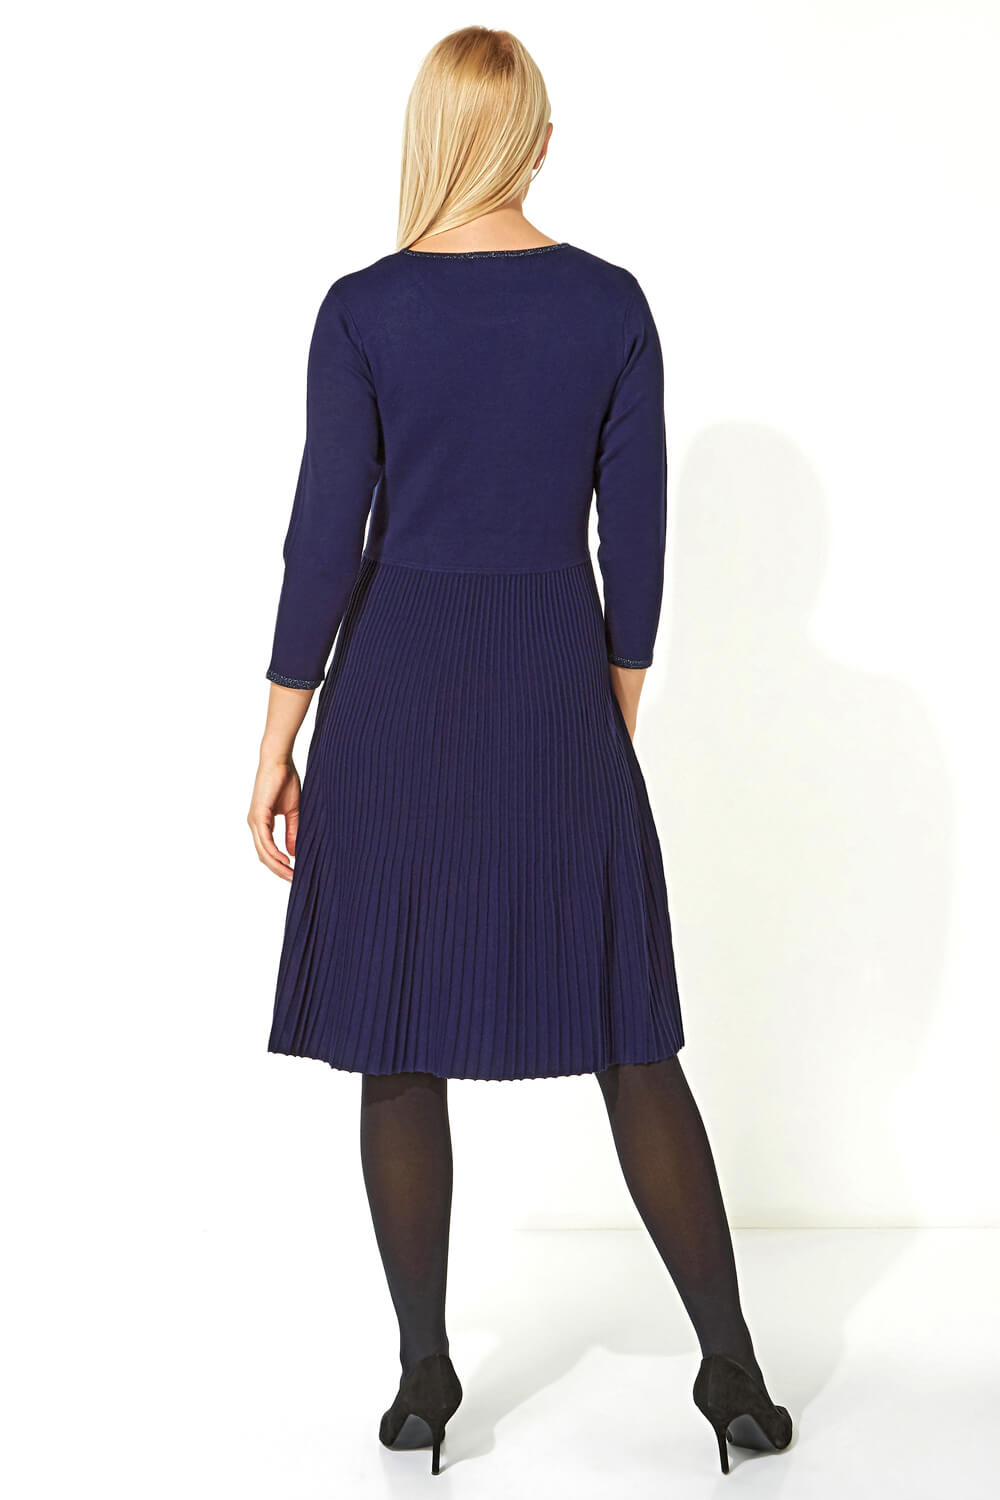 Navy  Fit and Flare Knitted Dress, Image 3 of 5